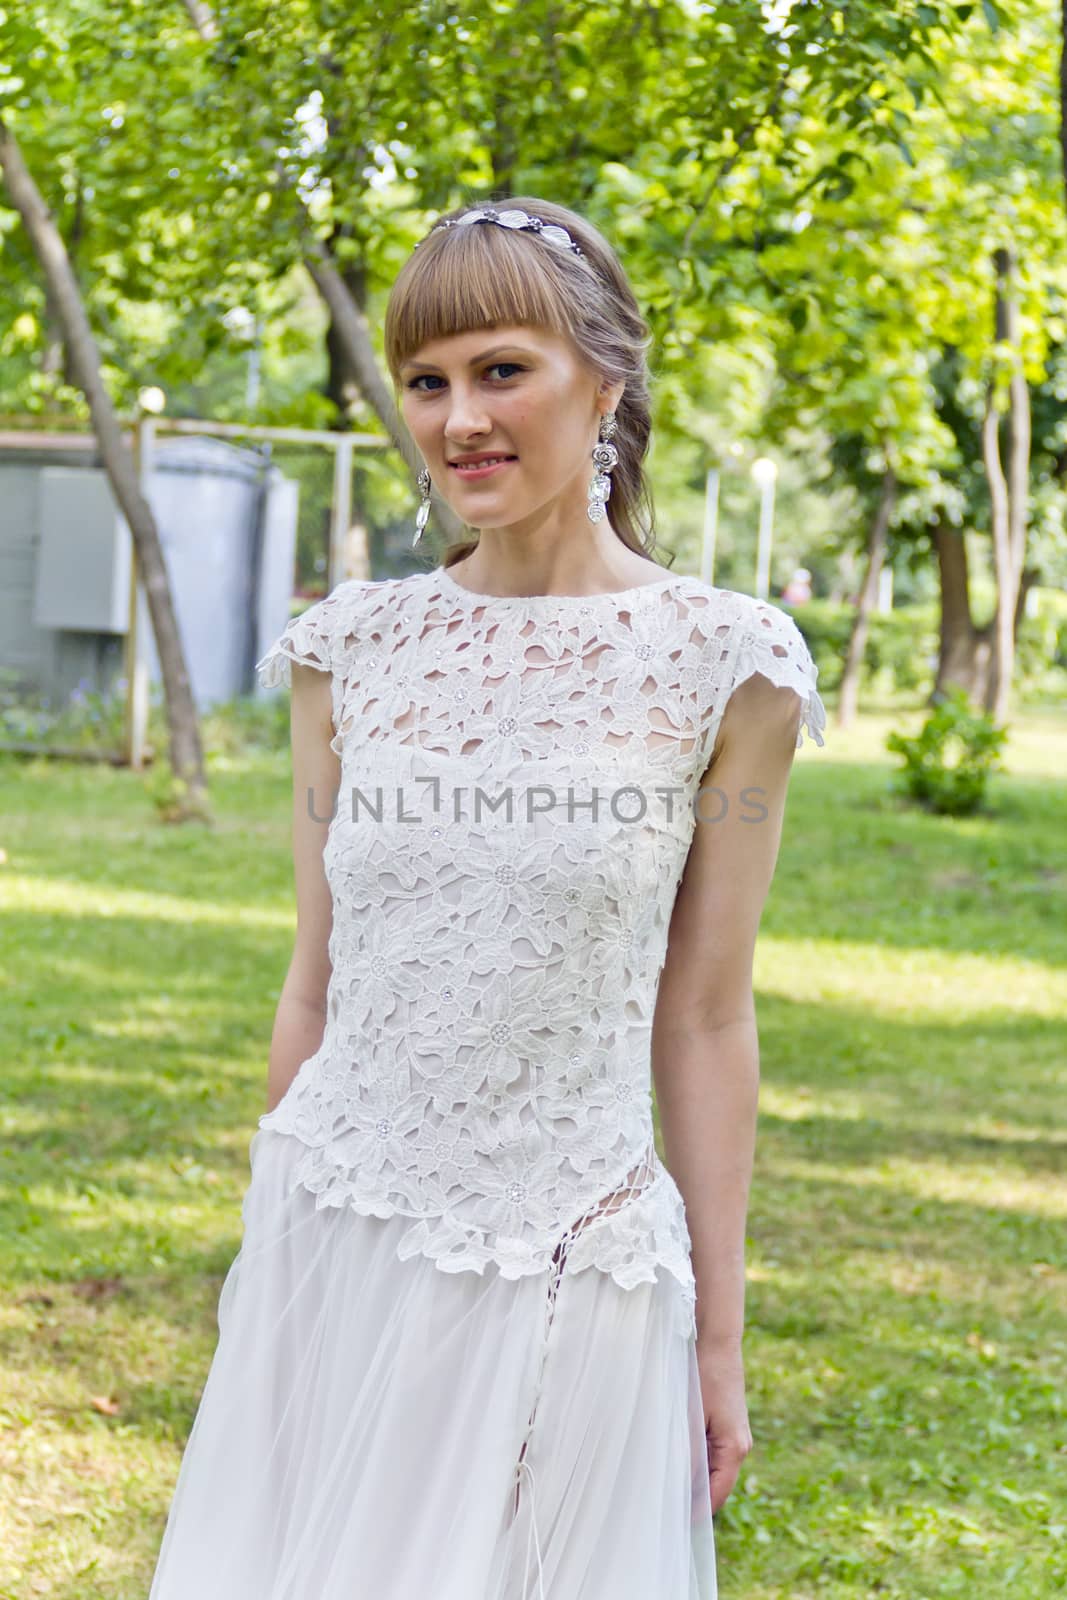 Beautiful bride in white lace dress of the summer park